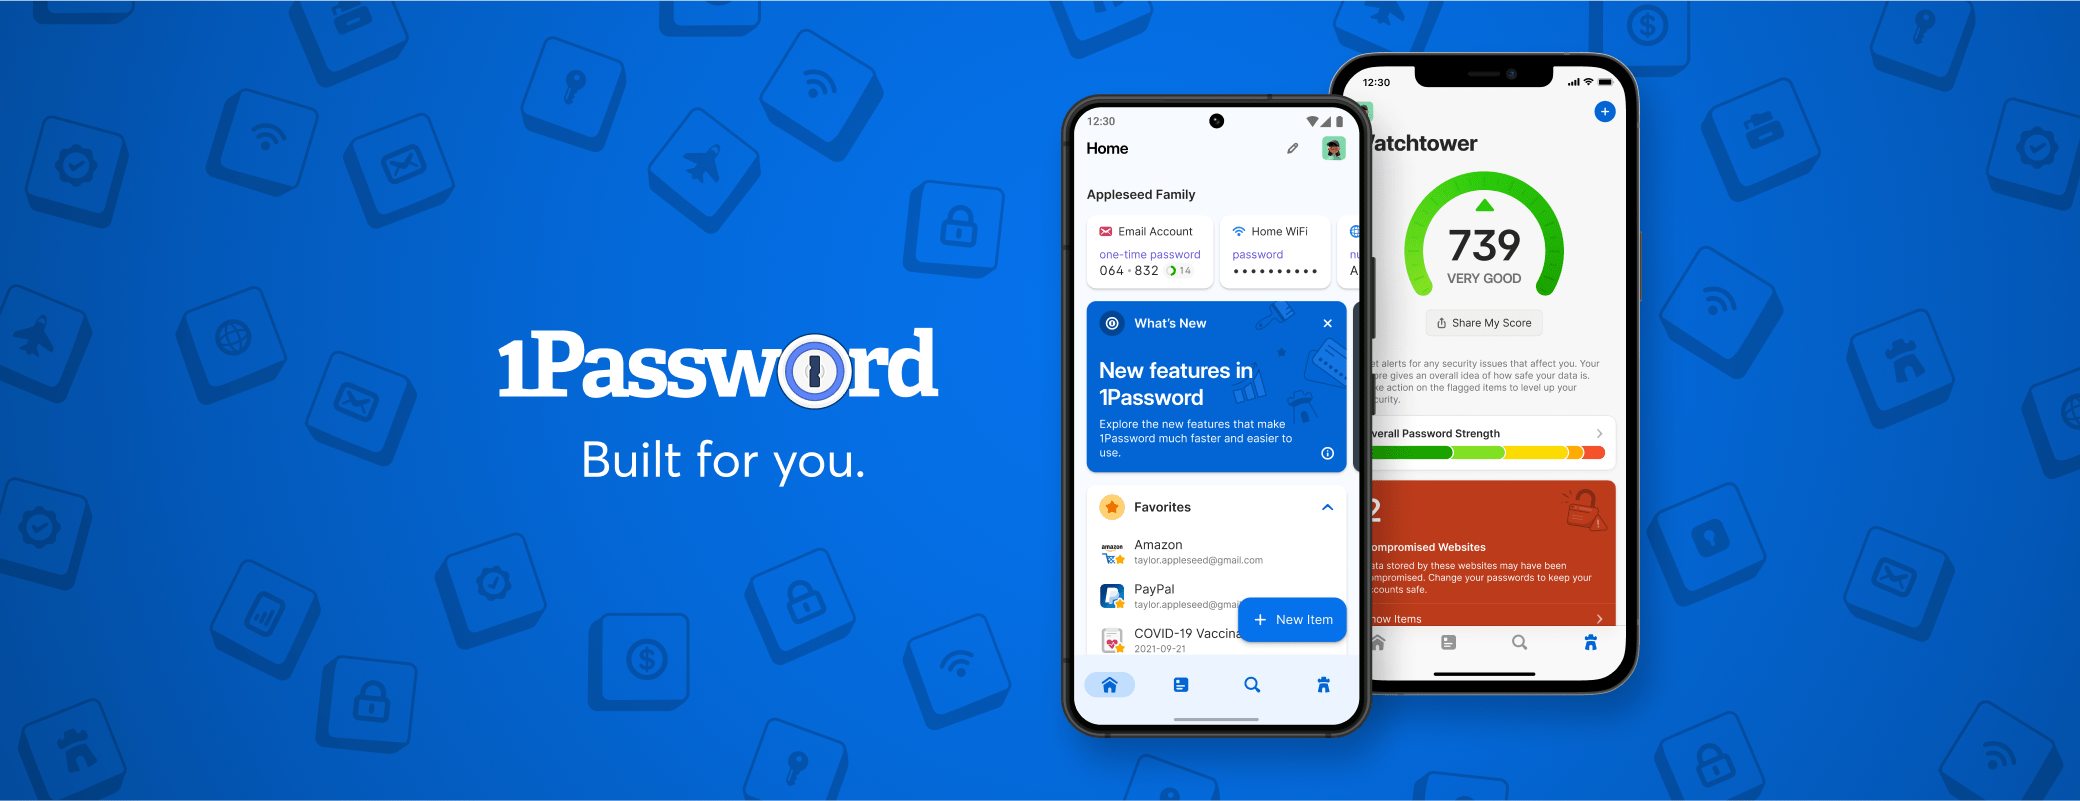 1Password 8 for Android